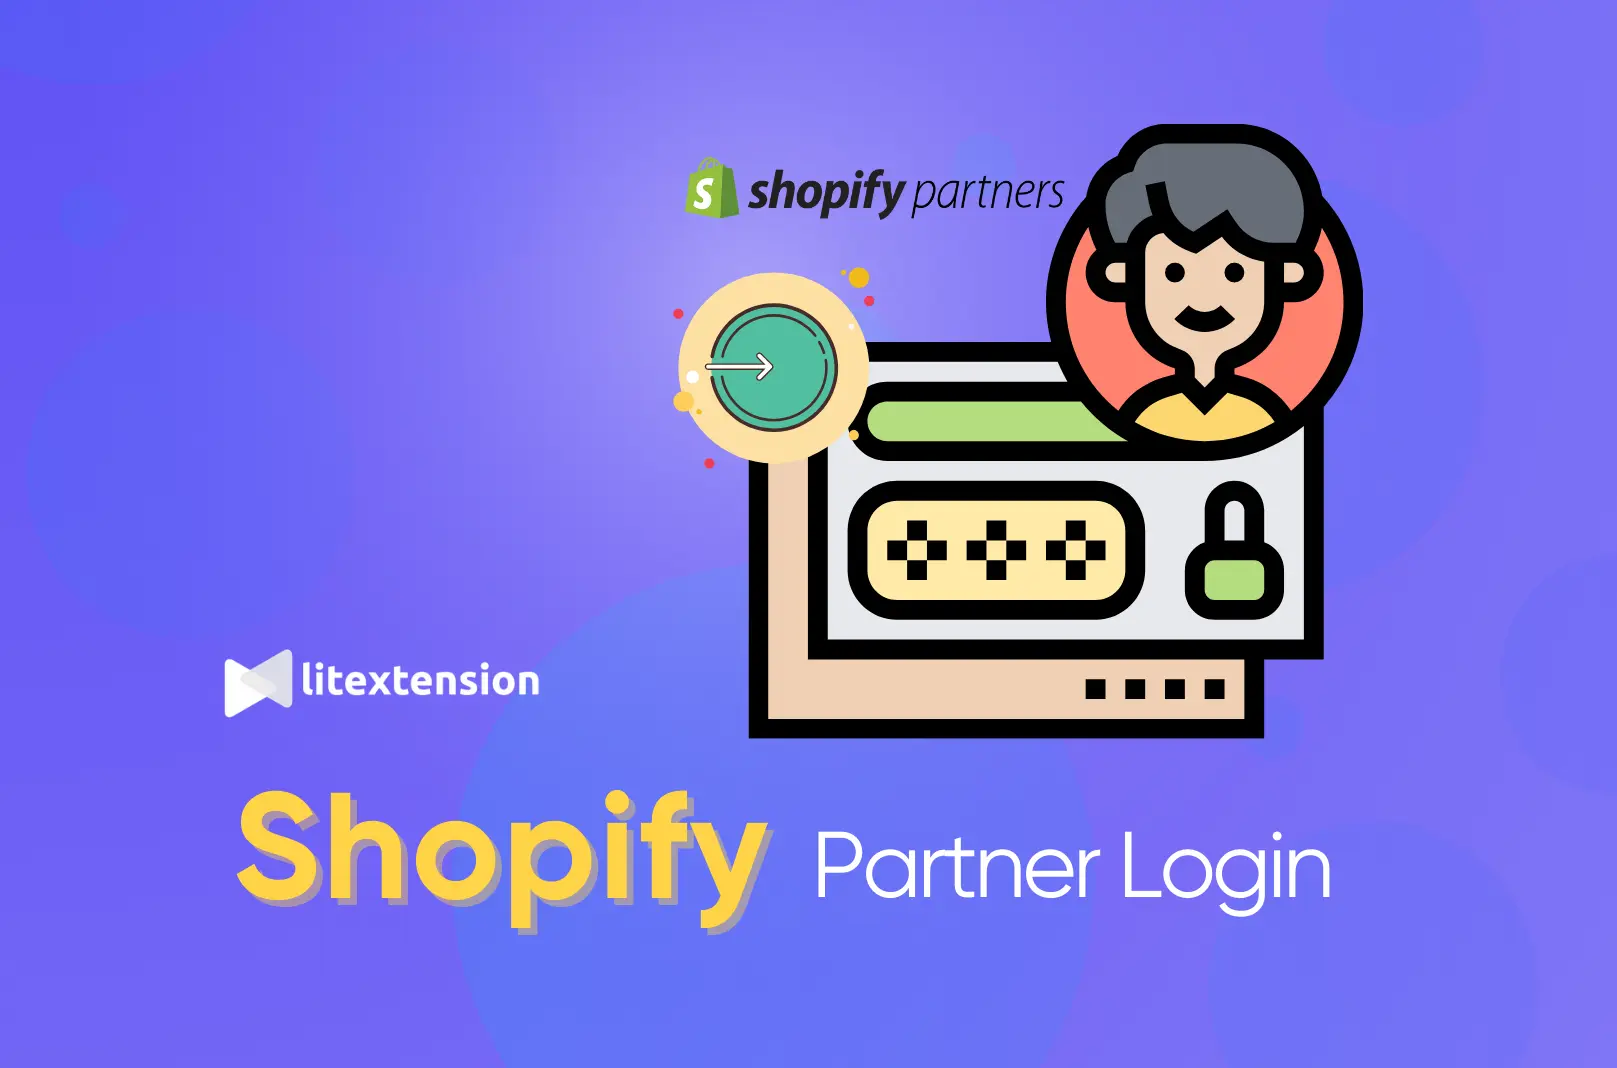 How To Login To Your Shopify Account?